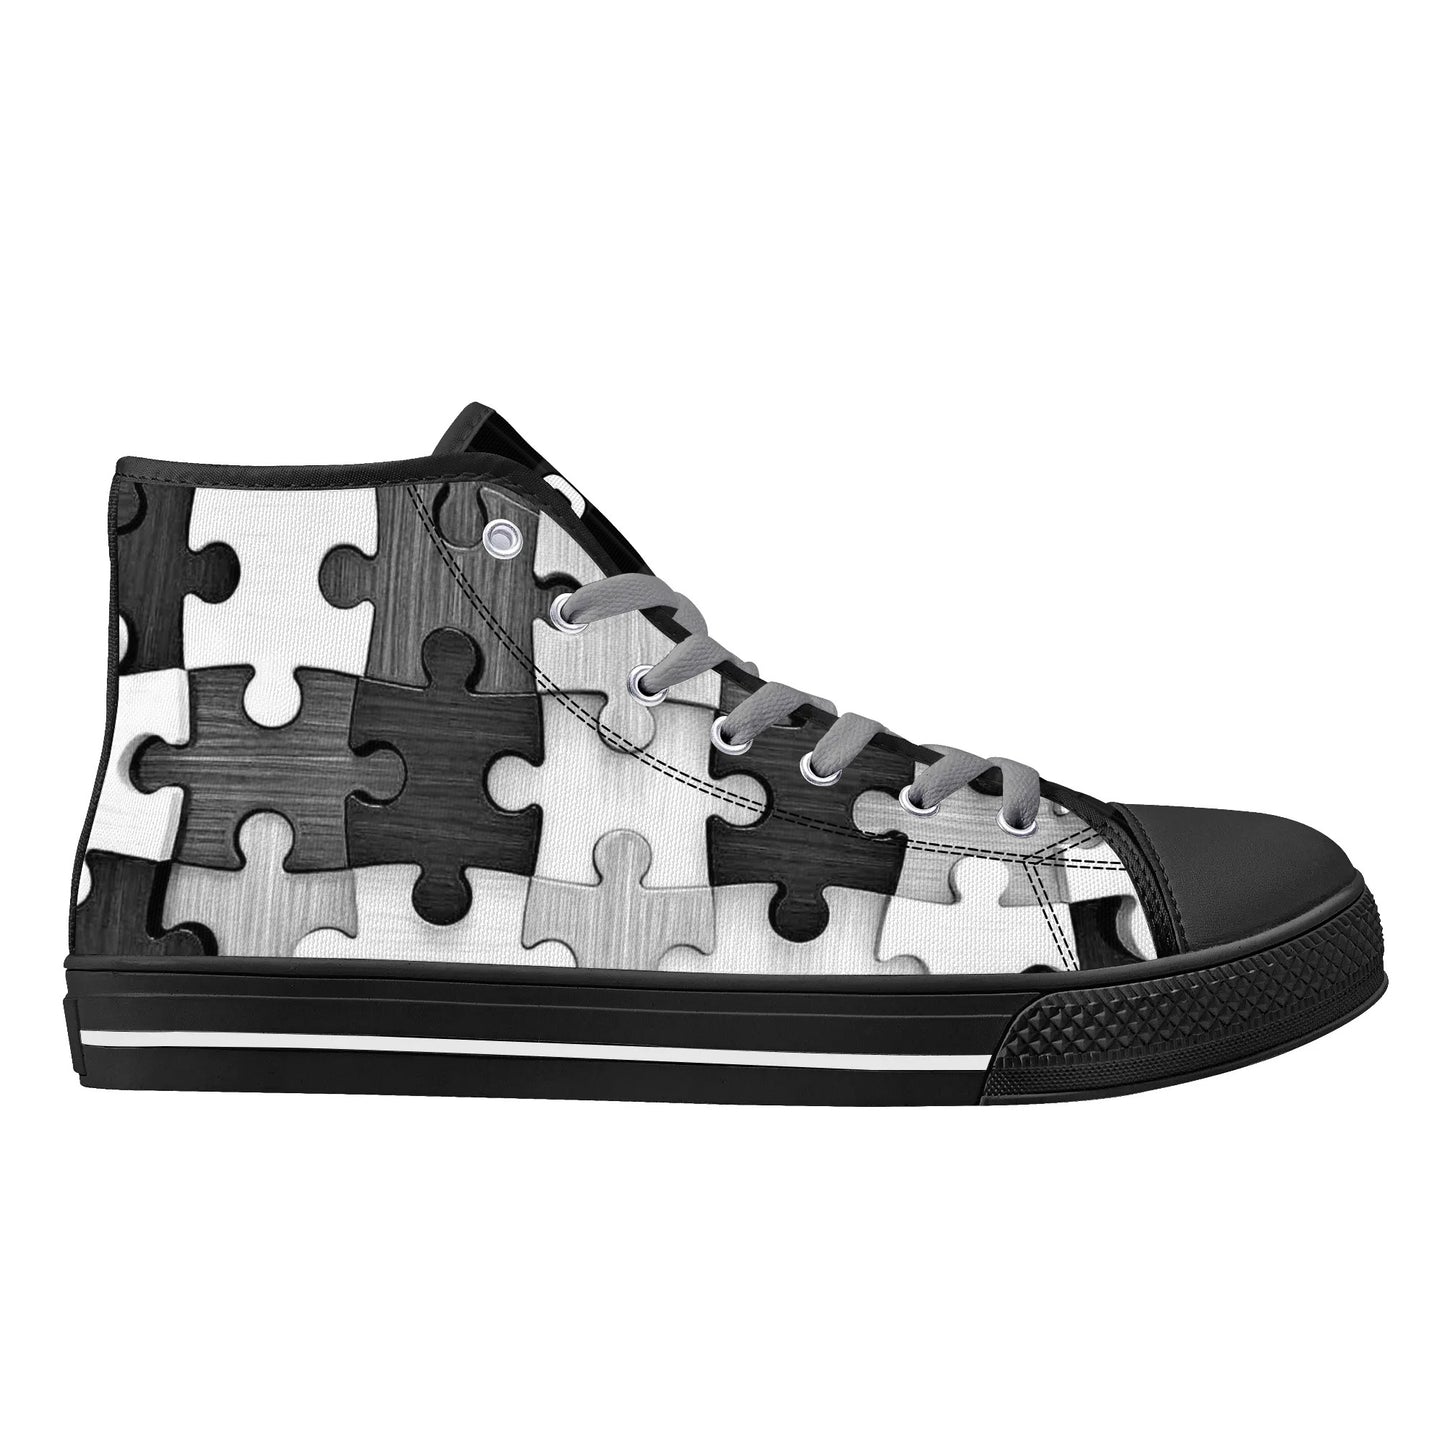 Mens DOPiFiED Puzzle & Plaid High Top Canvas Sneakers